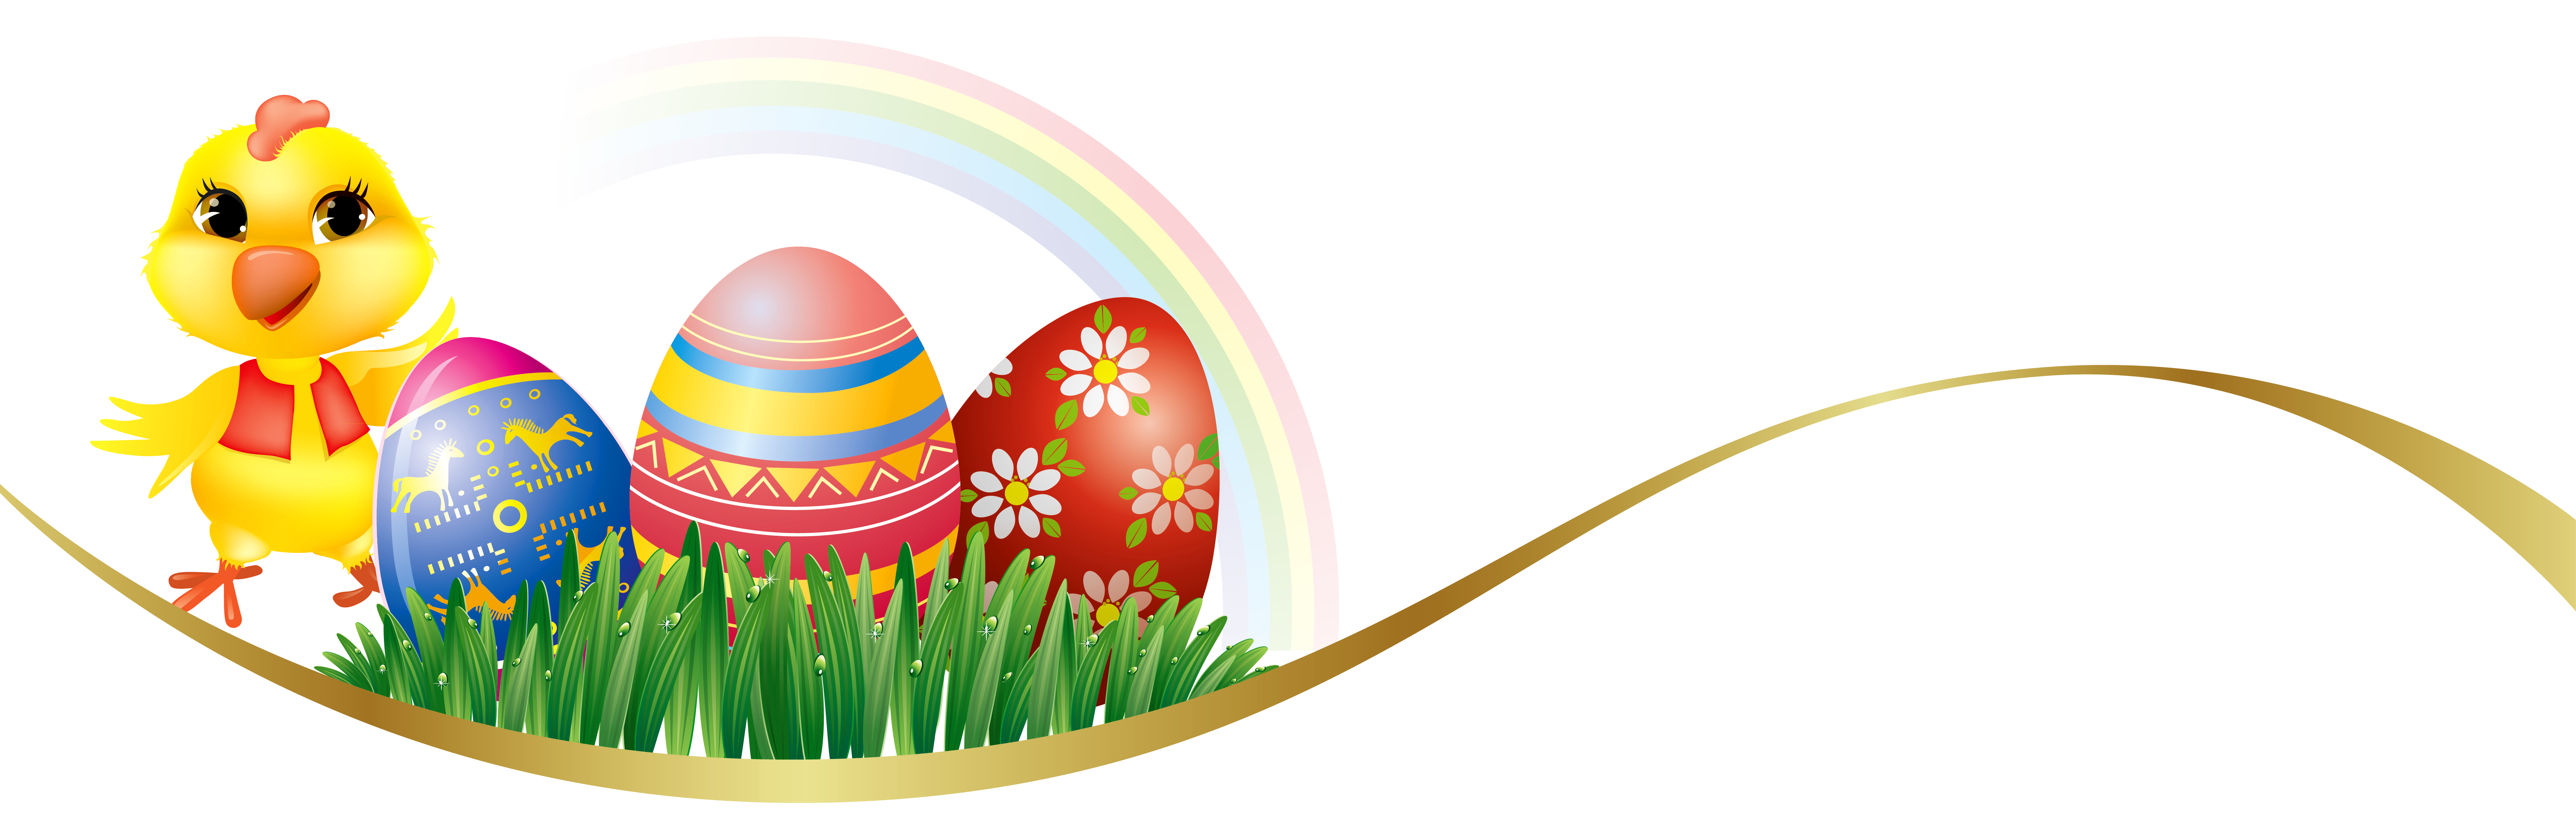 Easter Deco With Eggs And Chicken Png Clipart Picture Gallery Yopriceville High Quality Images And Transparent Png Free Clipart